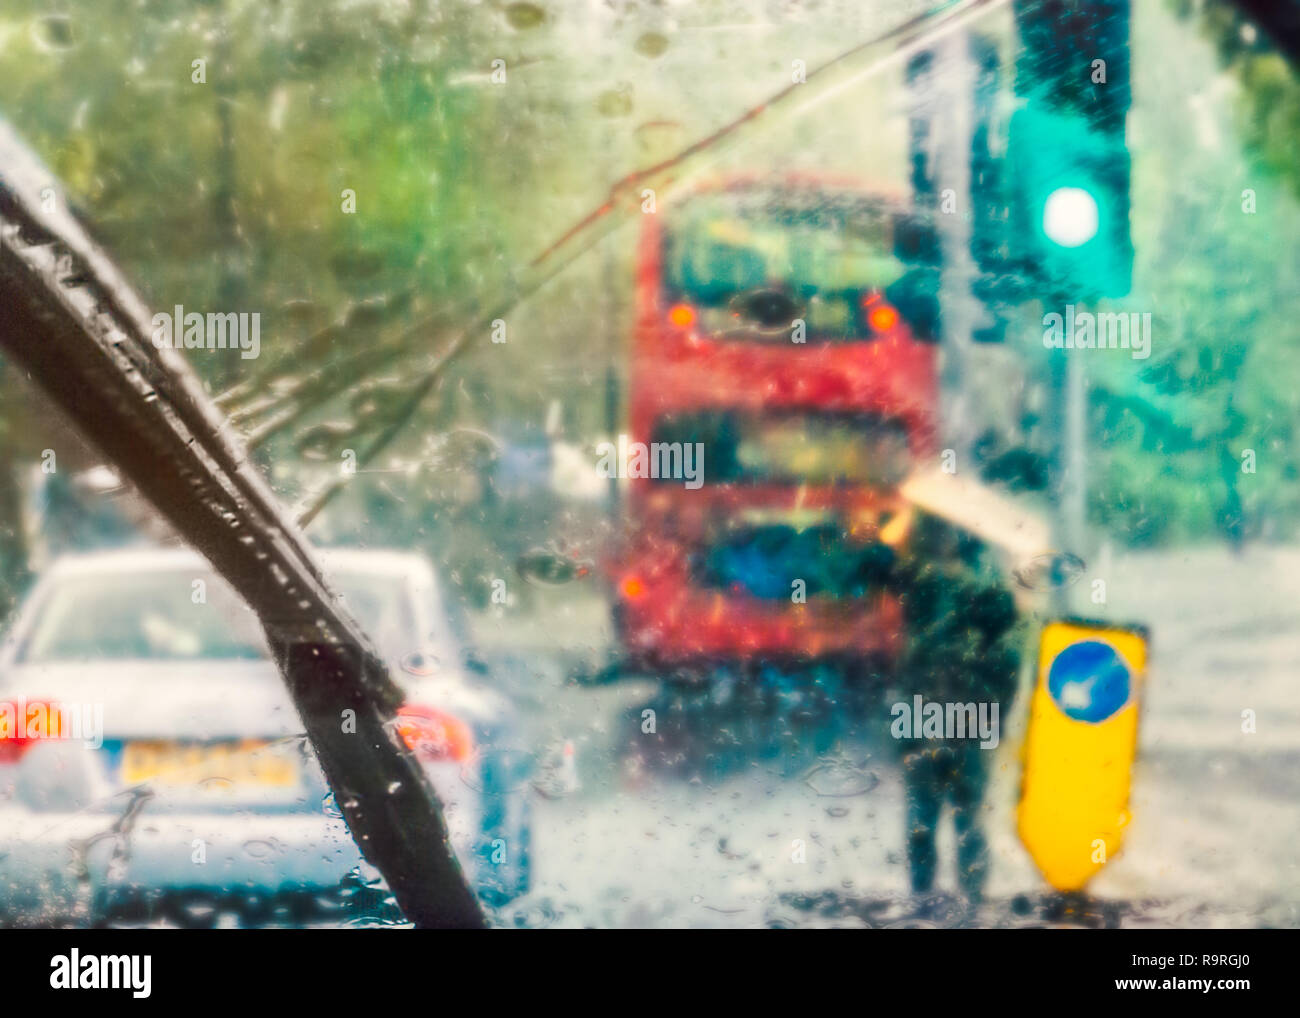 London street scene abstracted by rain on a car windscreen on a rainy day. A red bus can be seen and a man holding cardboard above his head for shelte Stock Photo